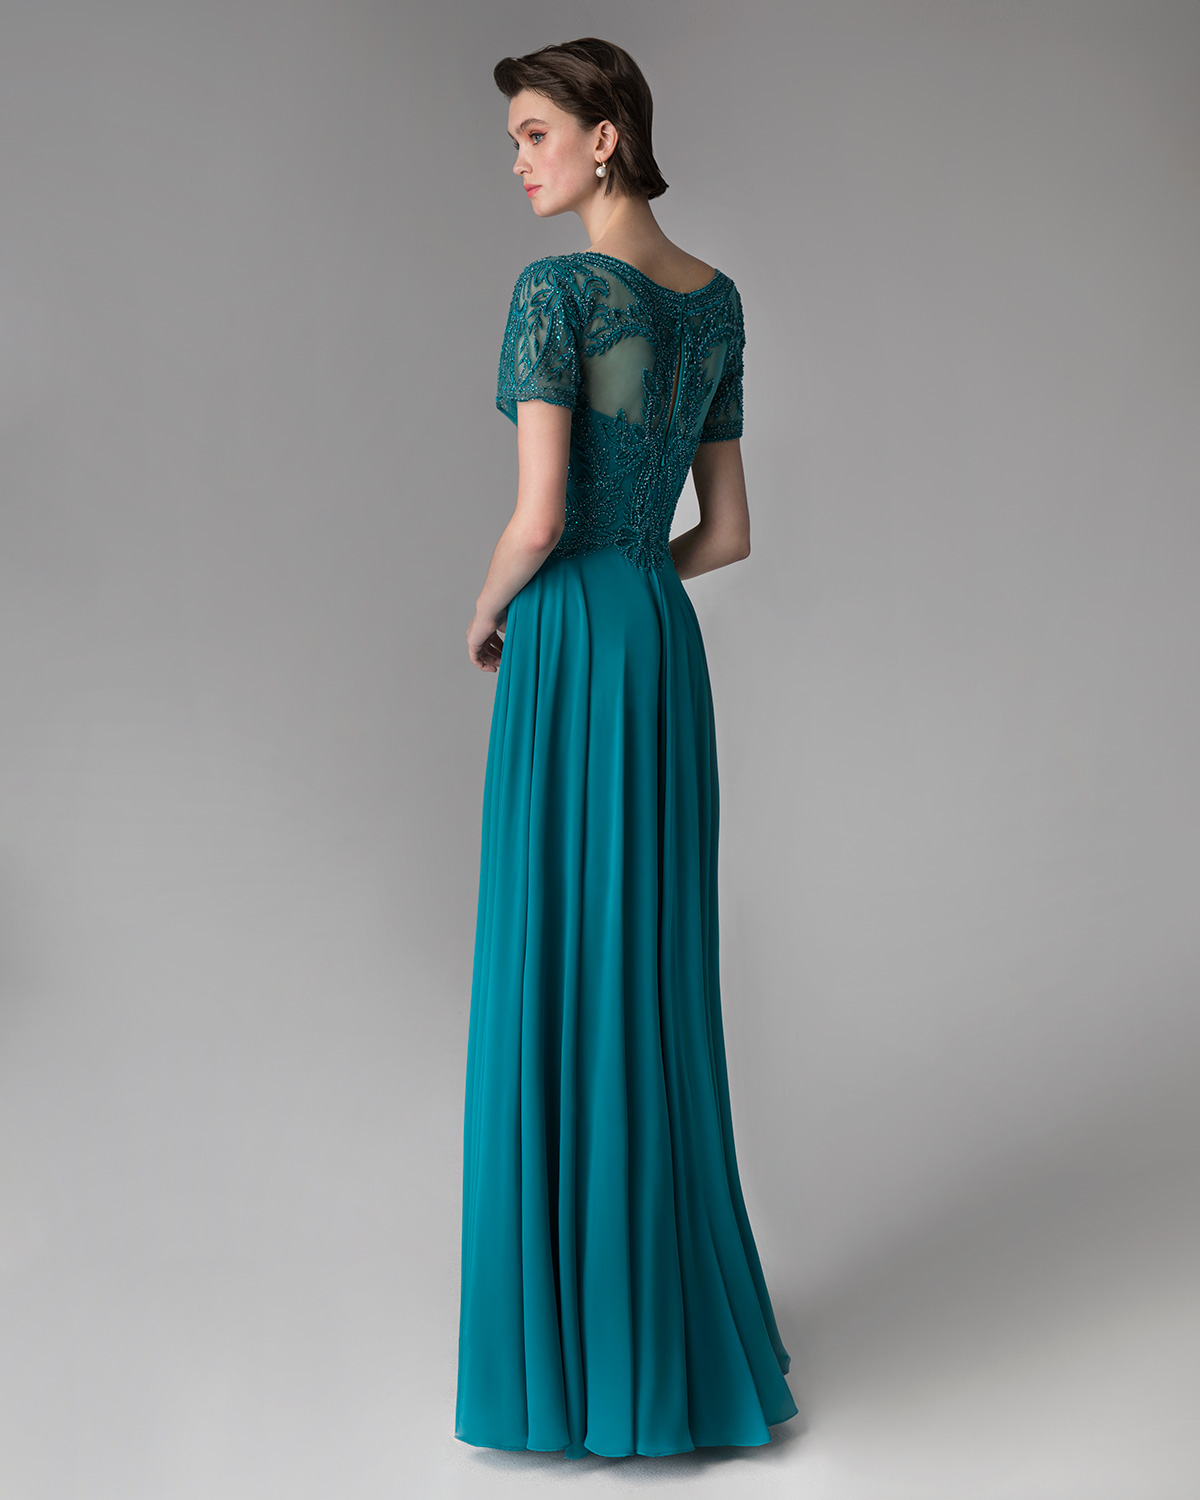 Classic Dresses / Long evening dress for the mother of the bride with fully beaded top and short sleeves